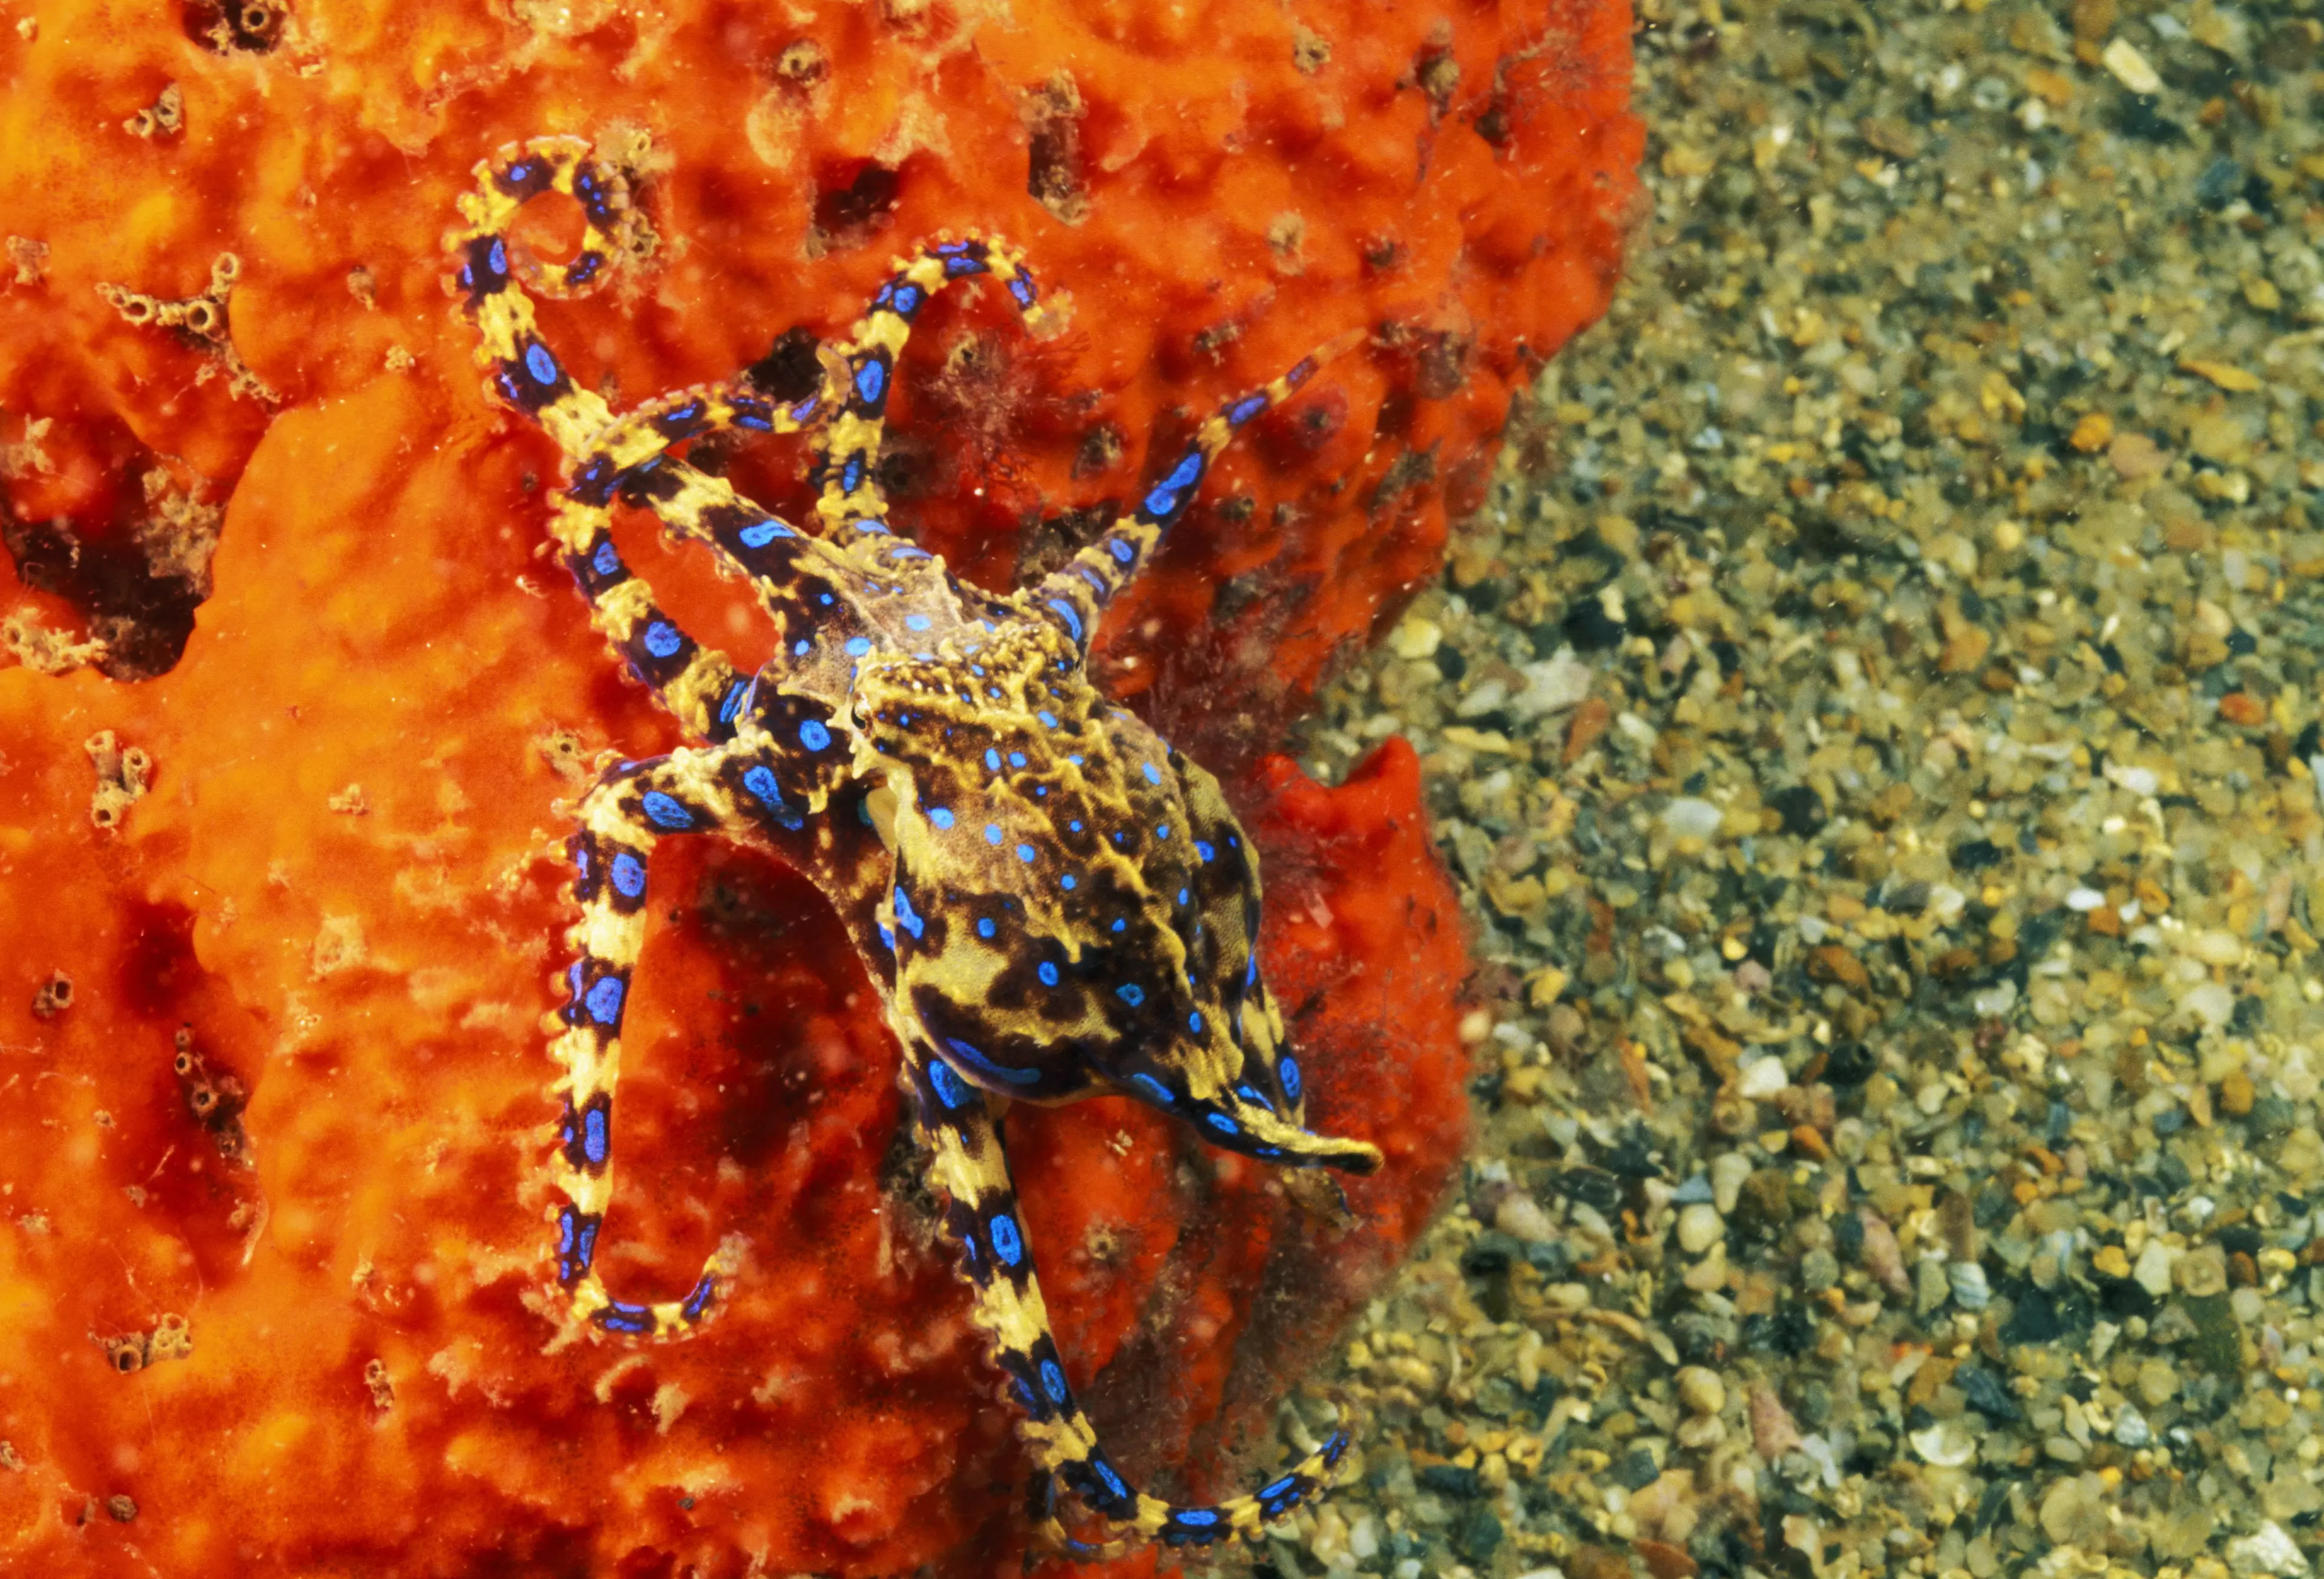 A highly venomous blue-ringed octopus.